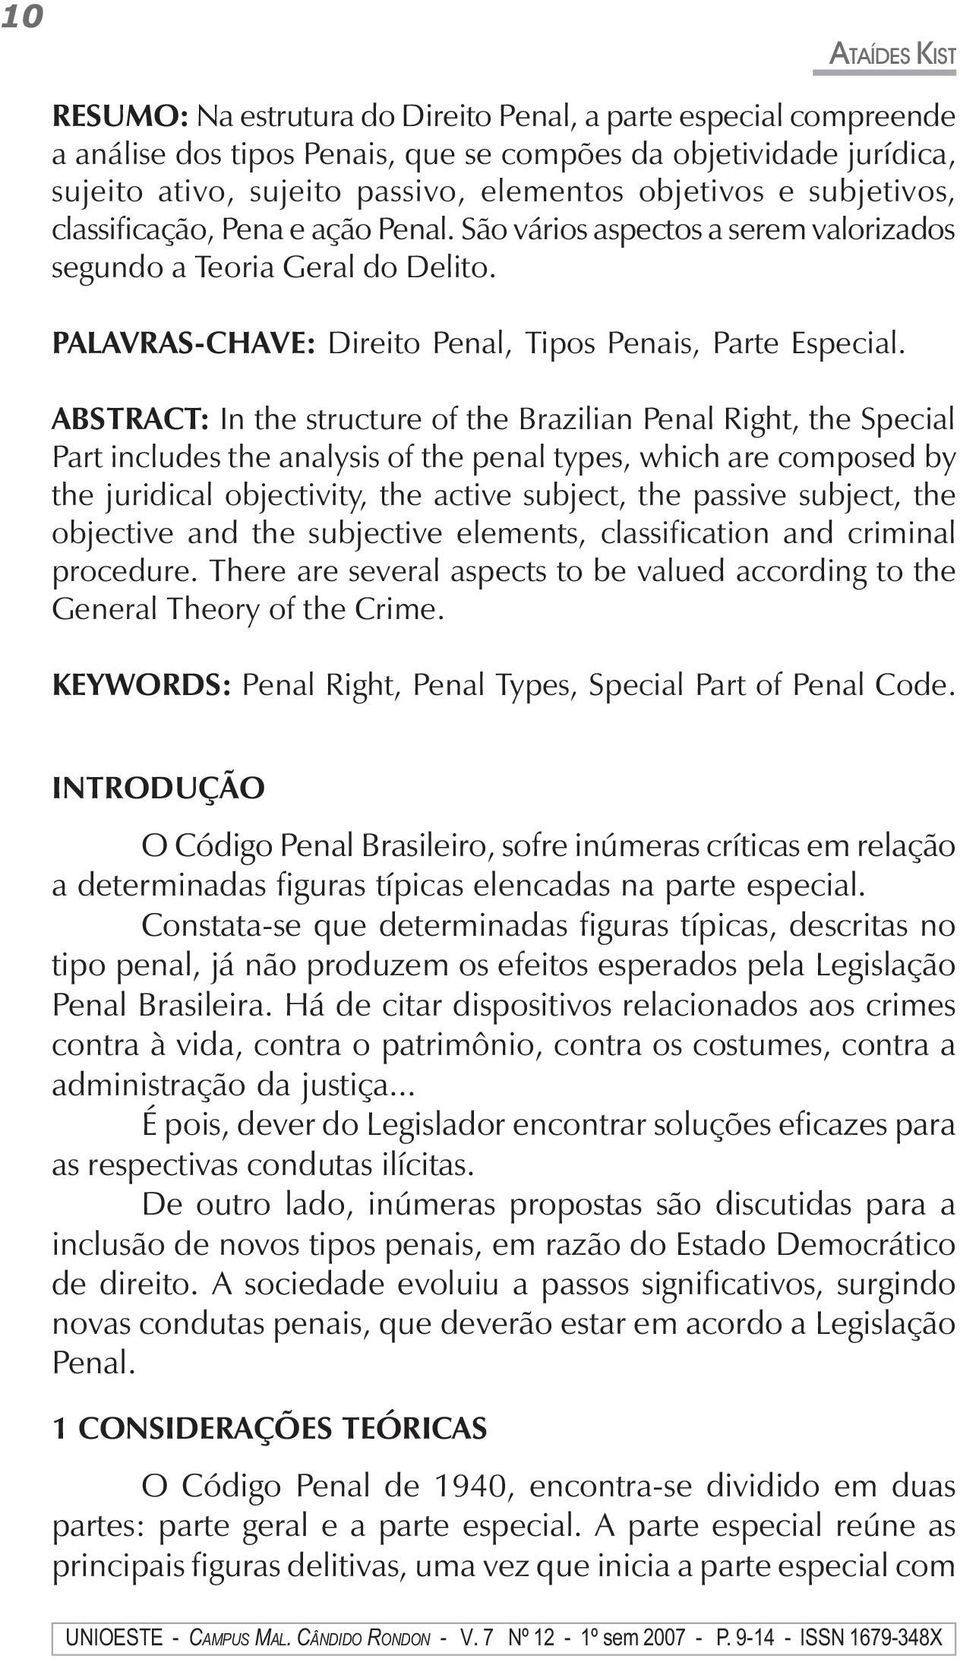 ABSTRACT: In the structure of the Brazilian Penal Right, the Special Part includes the analysis of the penal types, which are composed by the juridical objectivity, the active subject, the passive